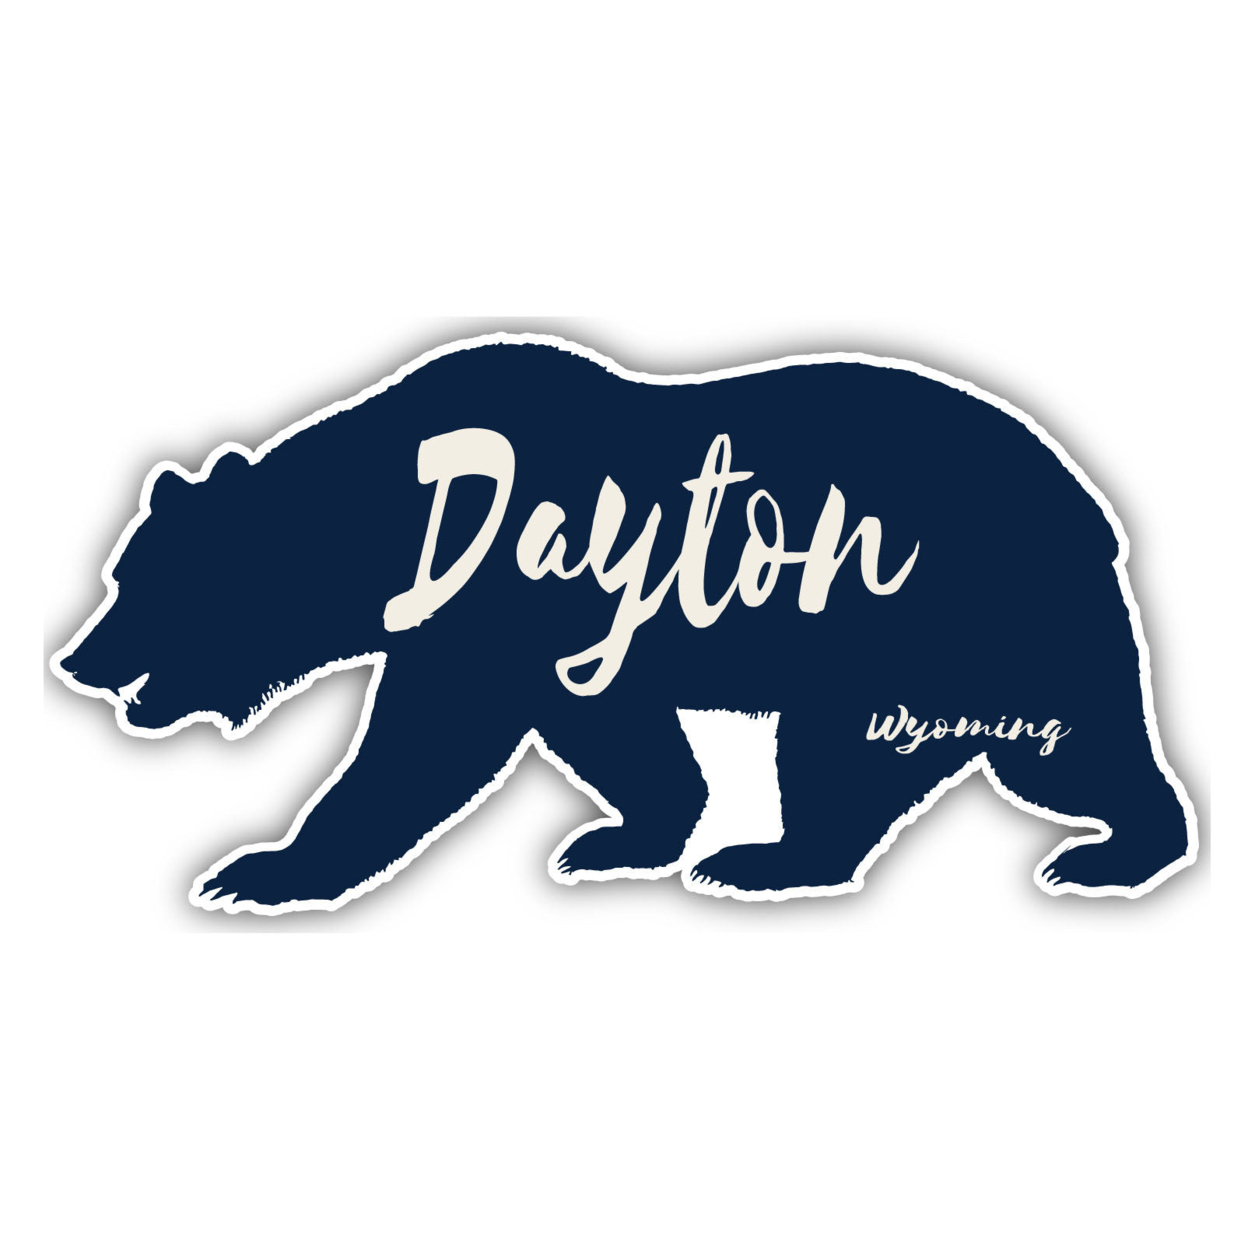 Dayton Wyoming Souvenir Decorative Stickers (Choose Theme And Size) - 4-Pack, 12-Inch, Bear